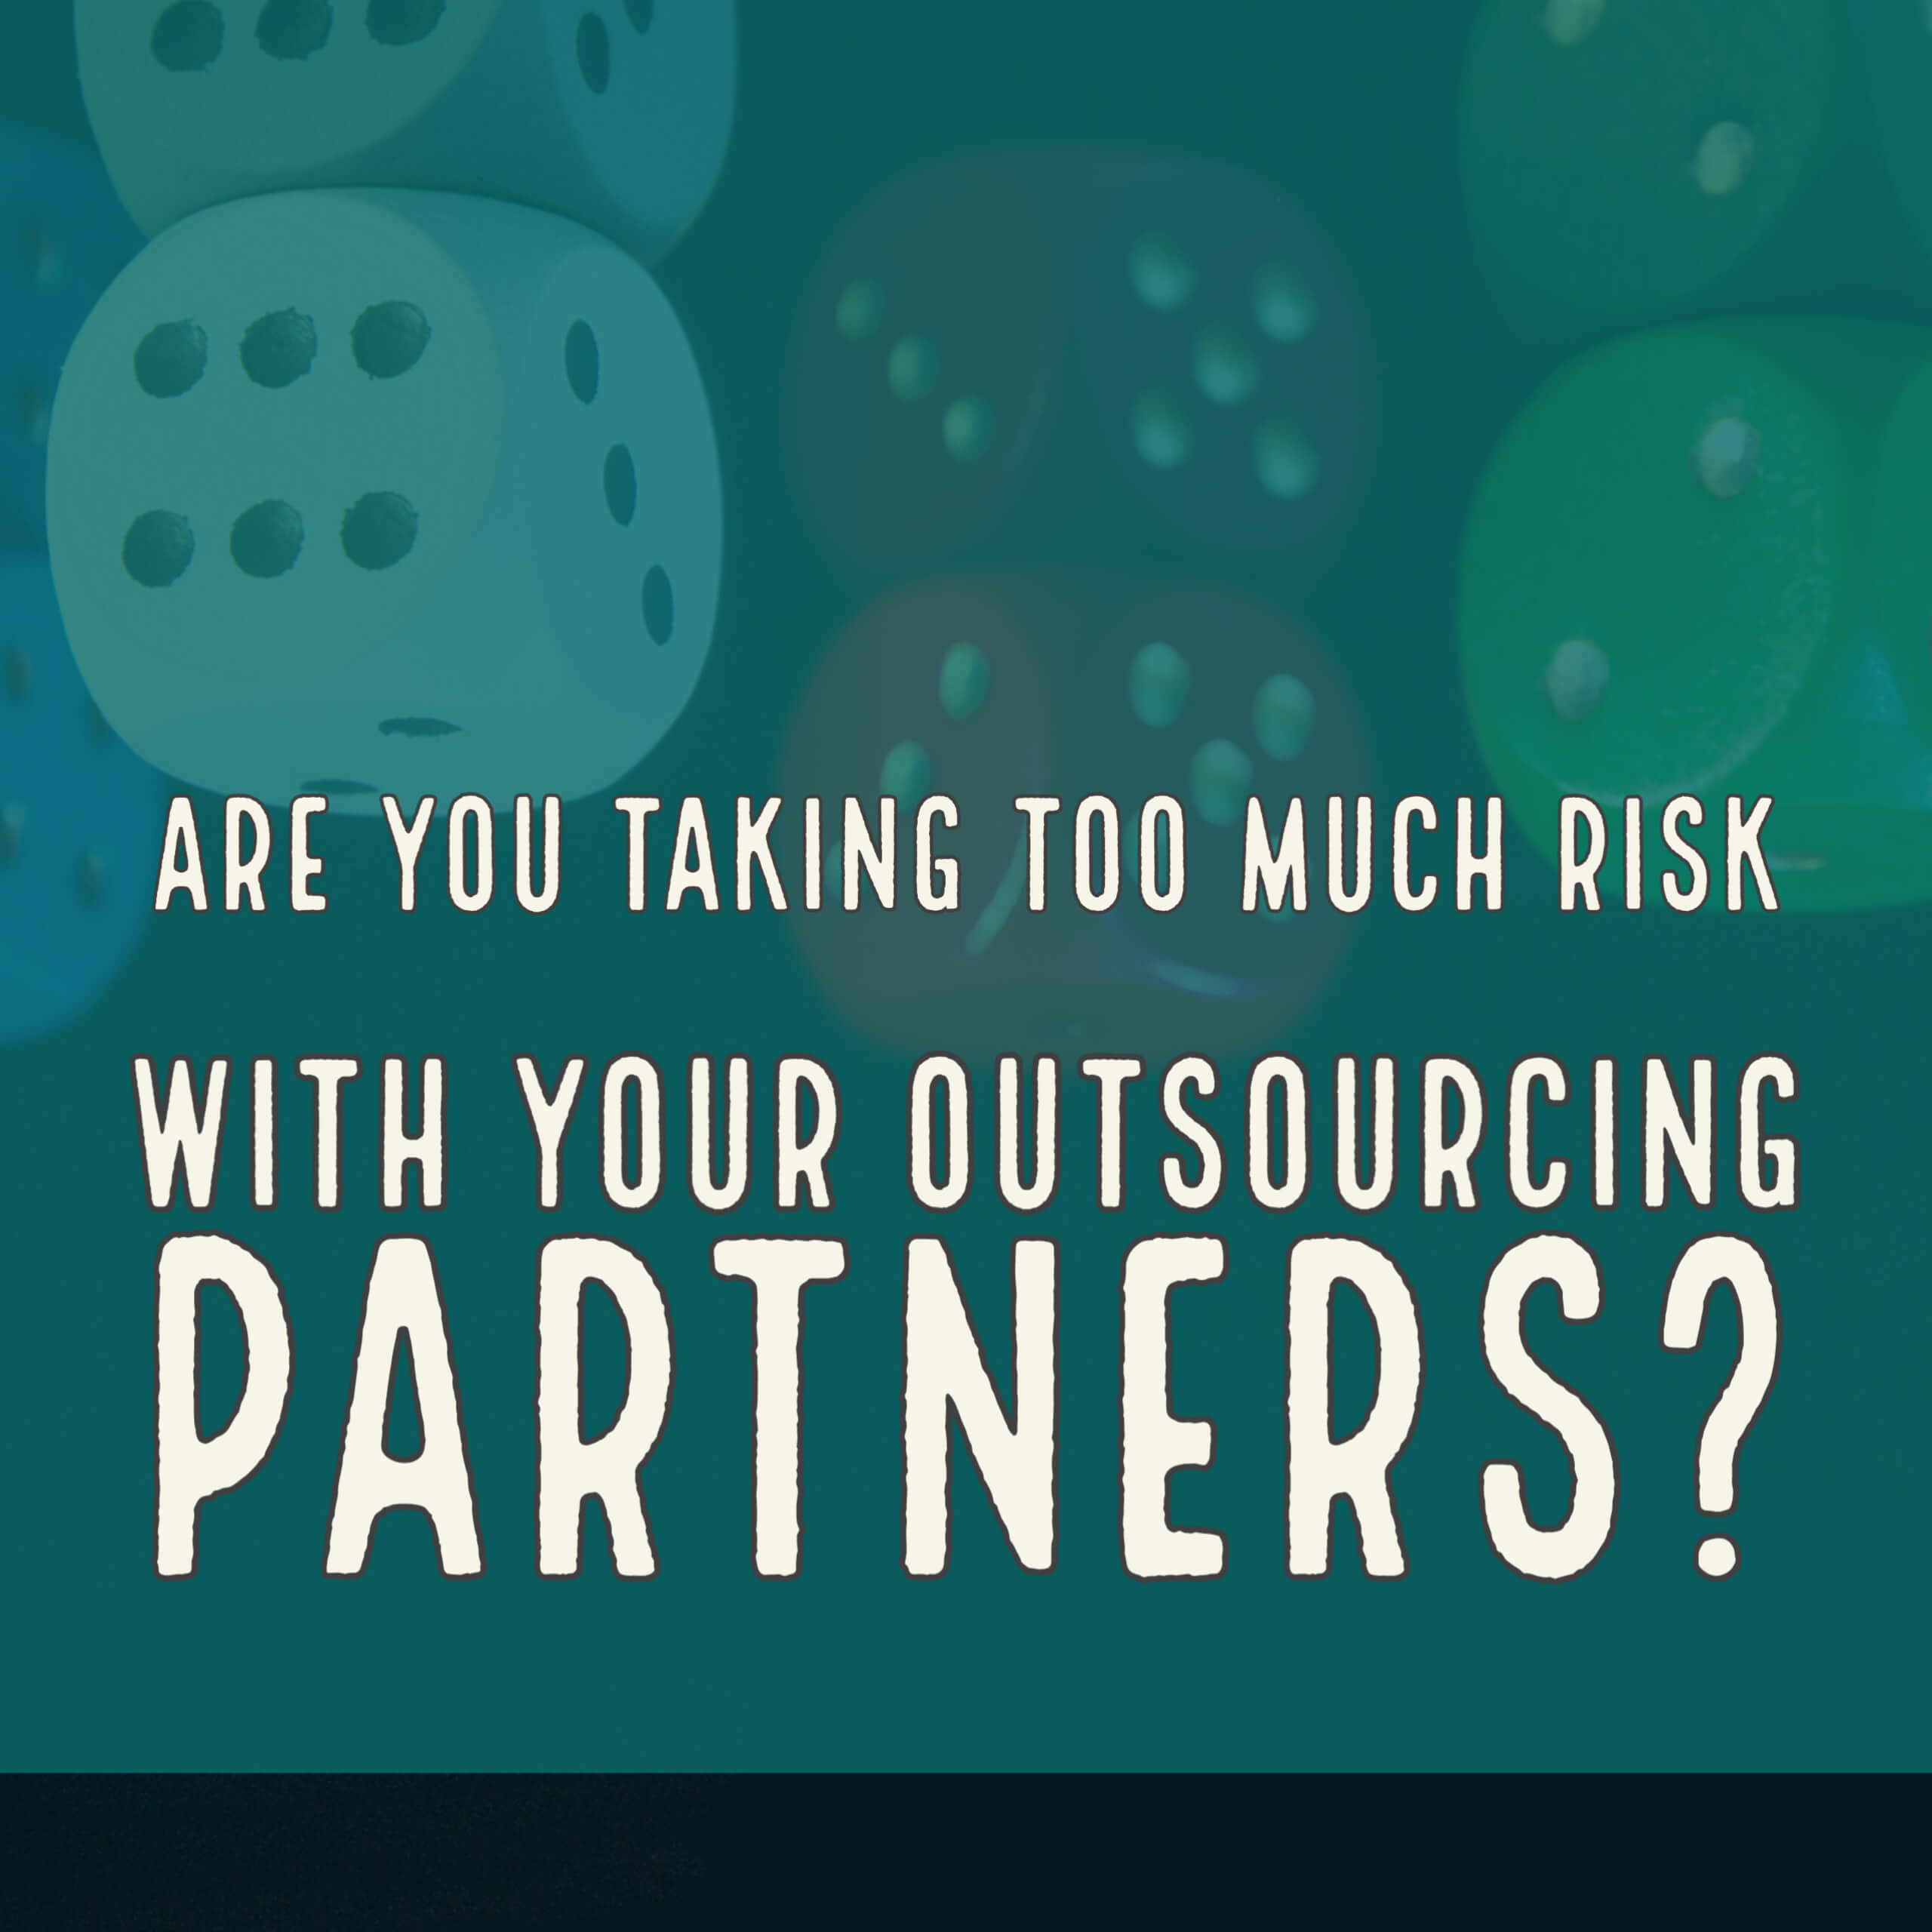 Are you taking too much risk with your outsourcing partners with a blue background overlaying dice.